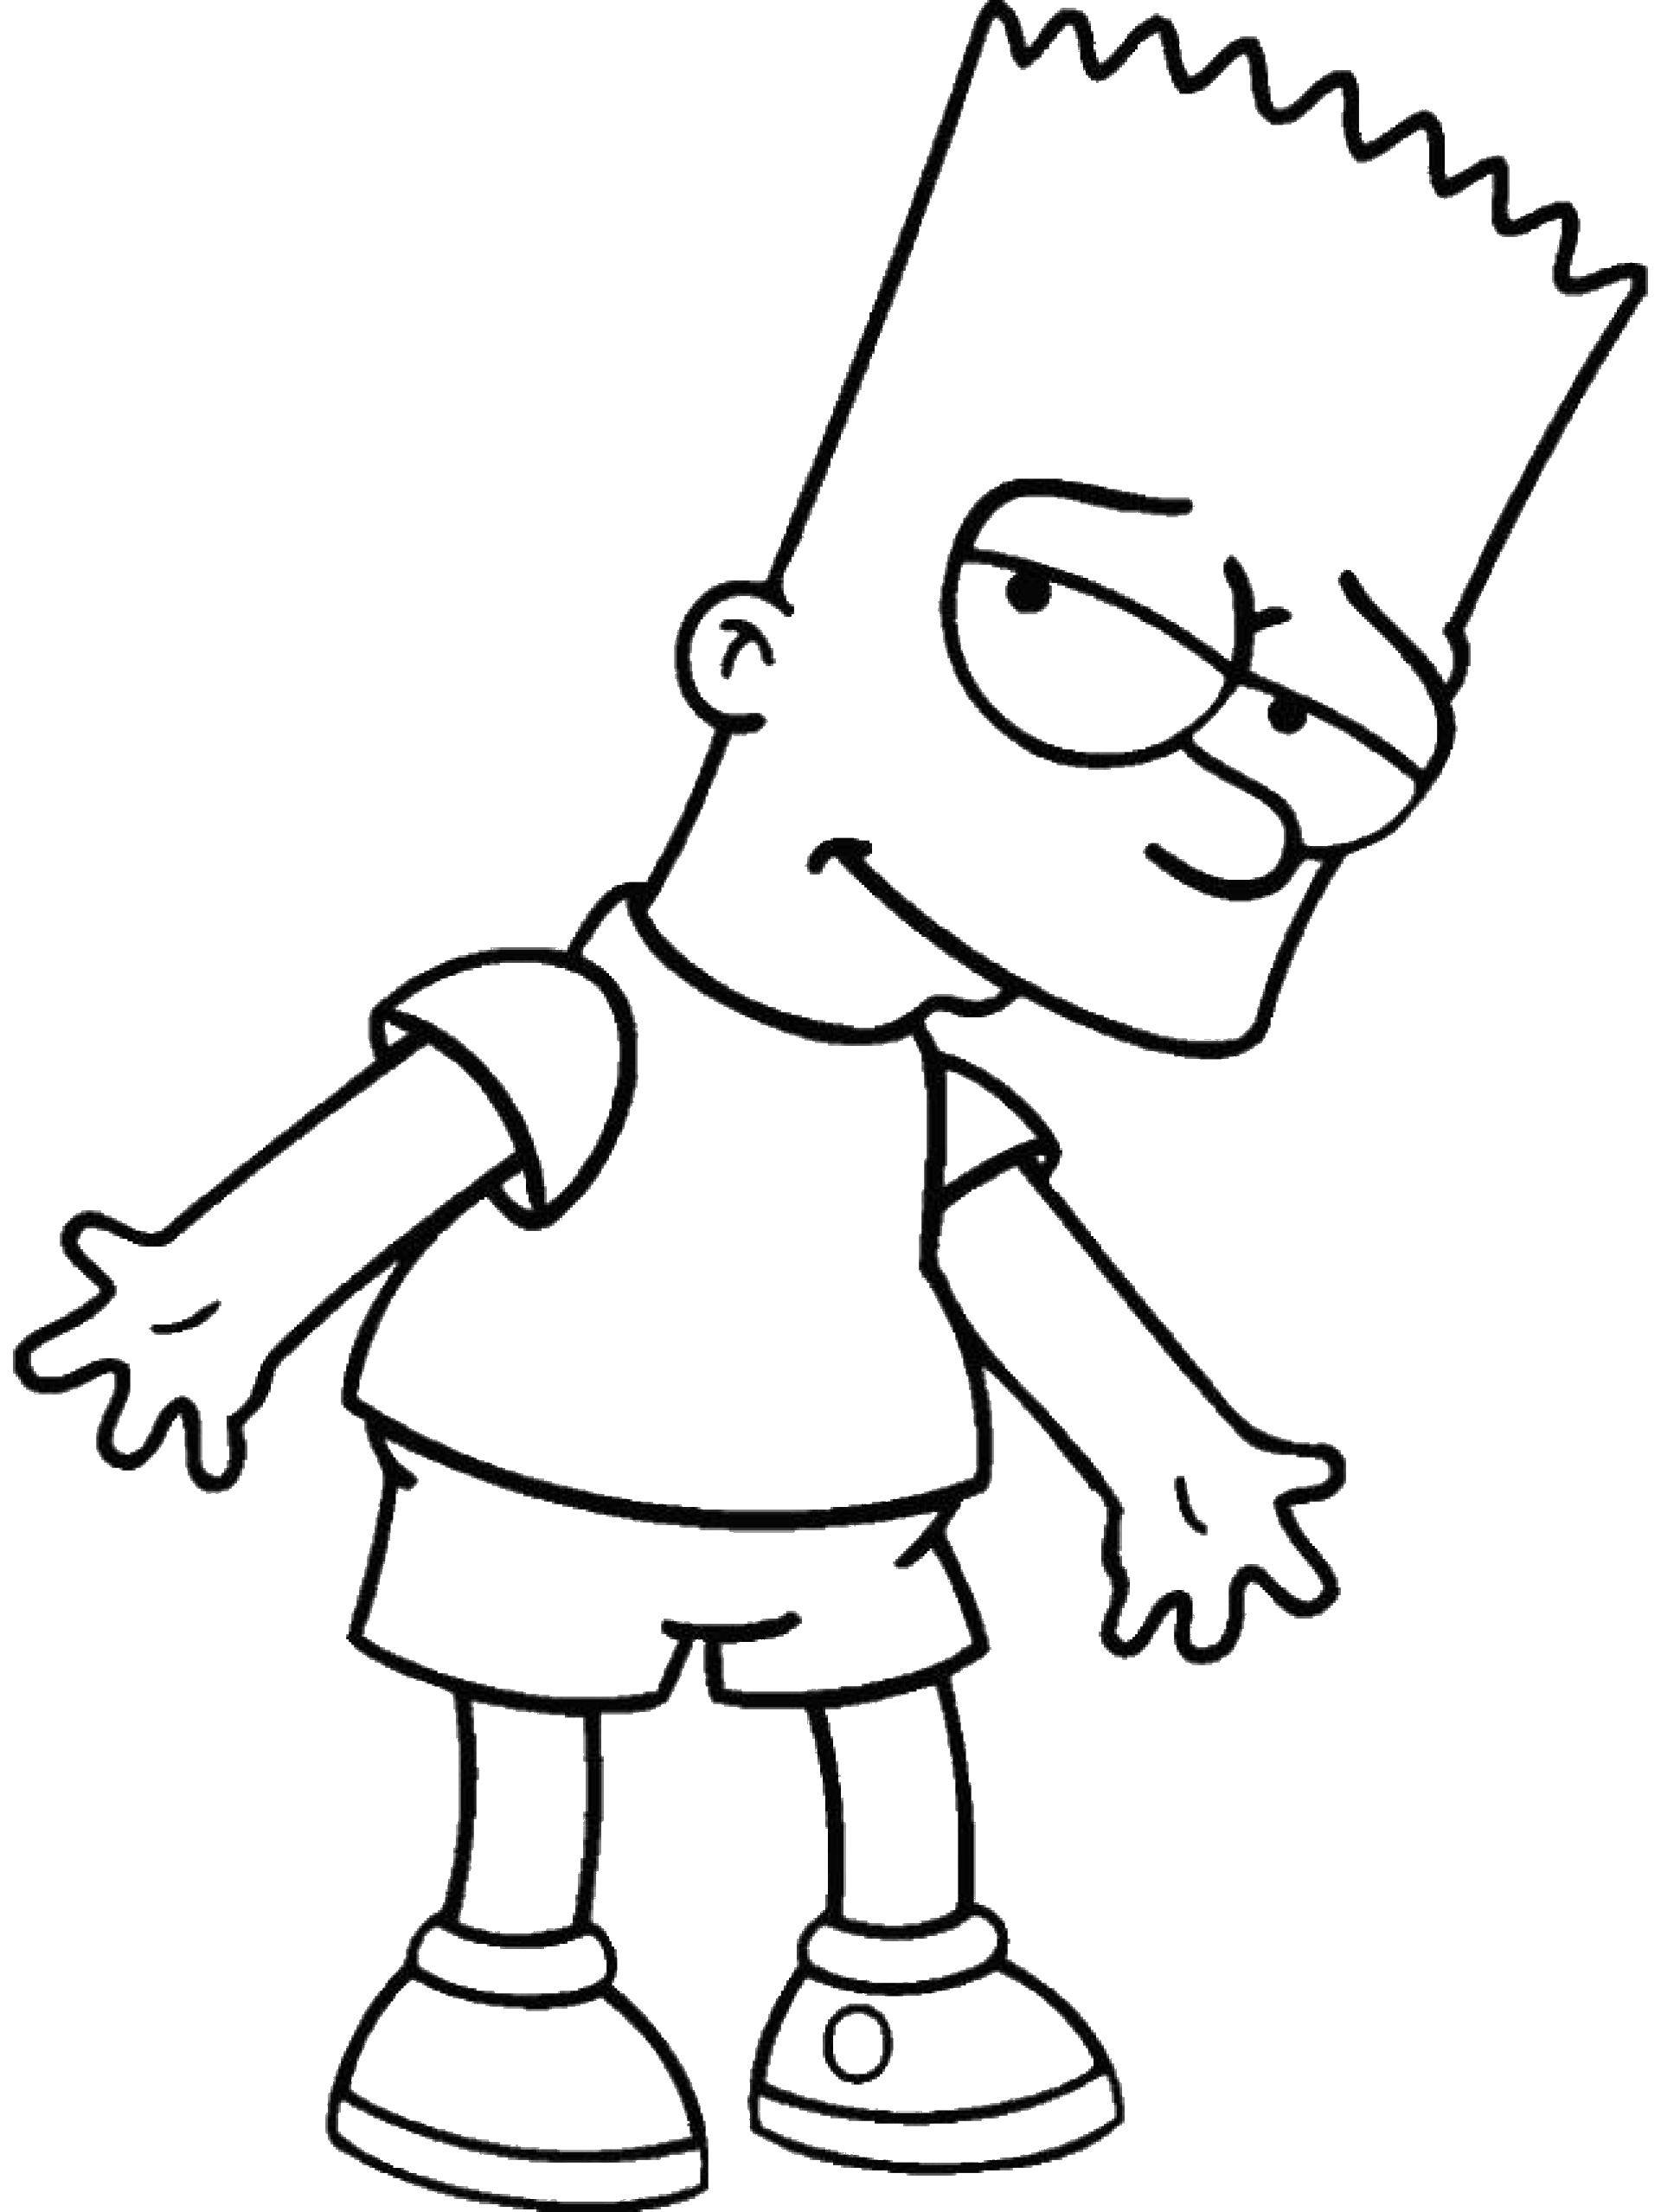 Coloring Lazy Bart. Category cartoons. Tags:  Cartoon character, Simpsons.